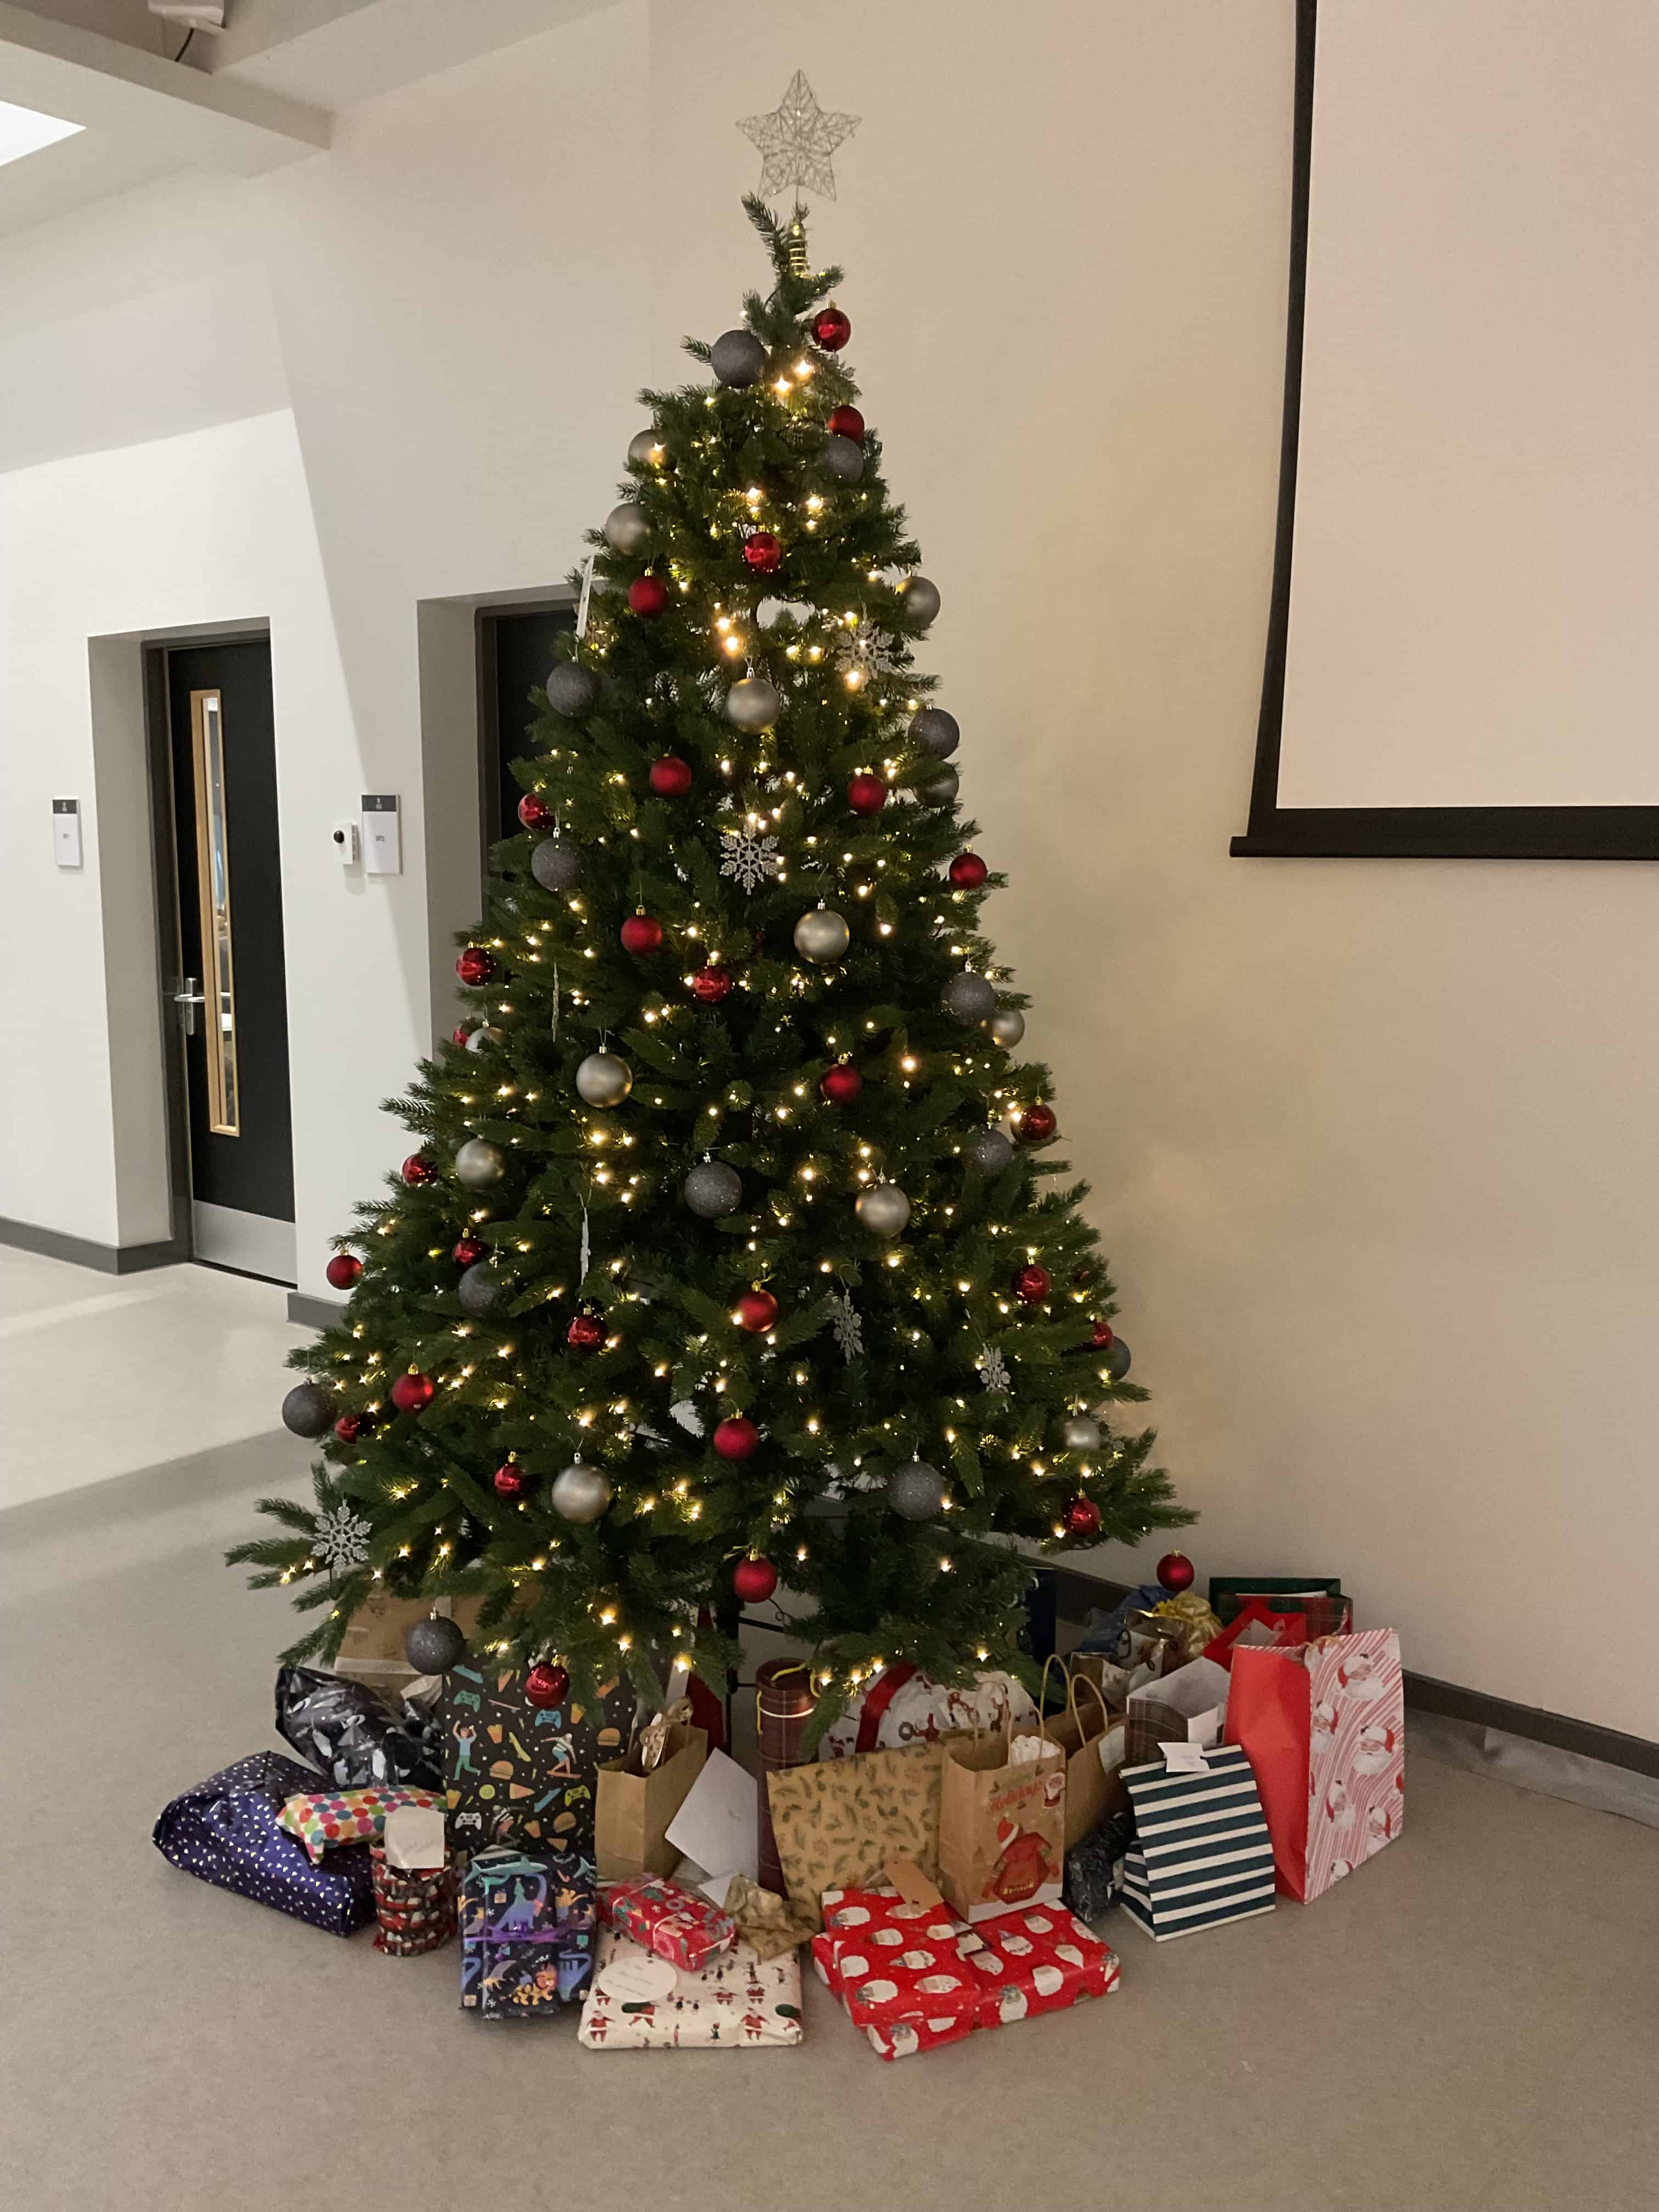 Gifts under the Christmas tree at Hazel Grove Sixth Form